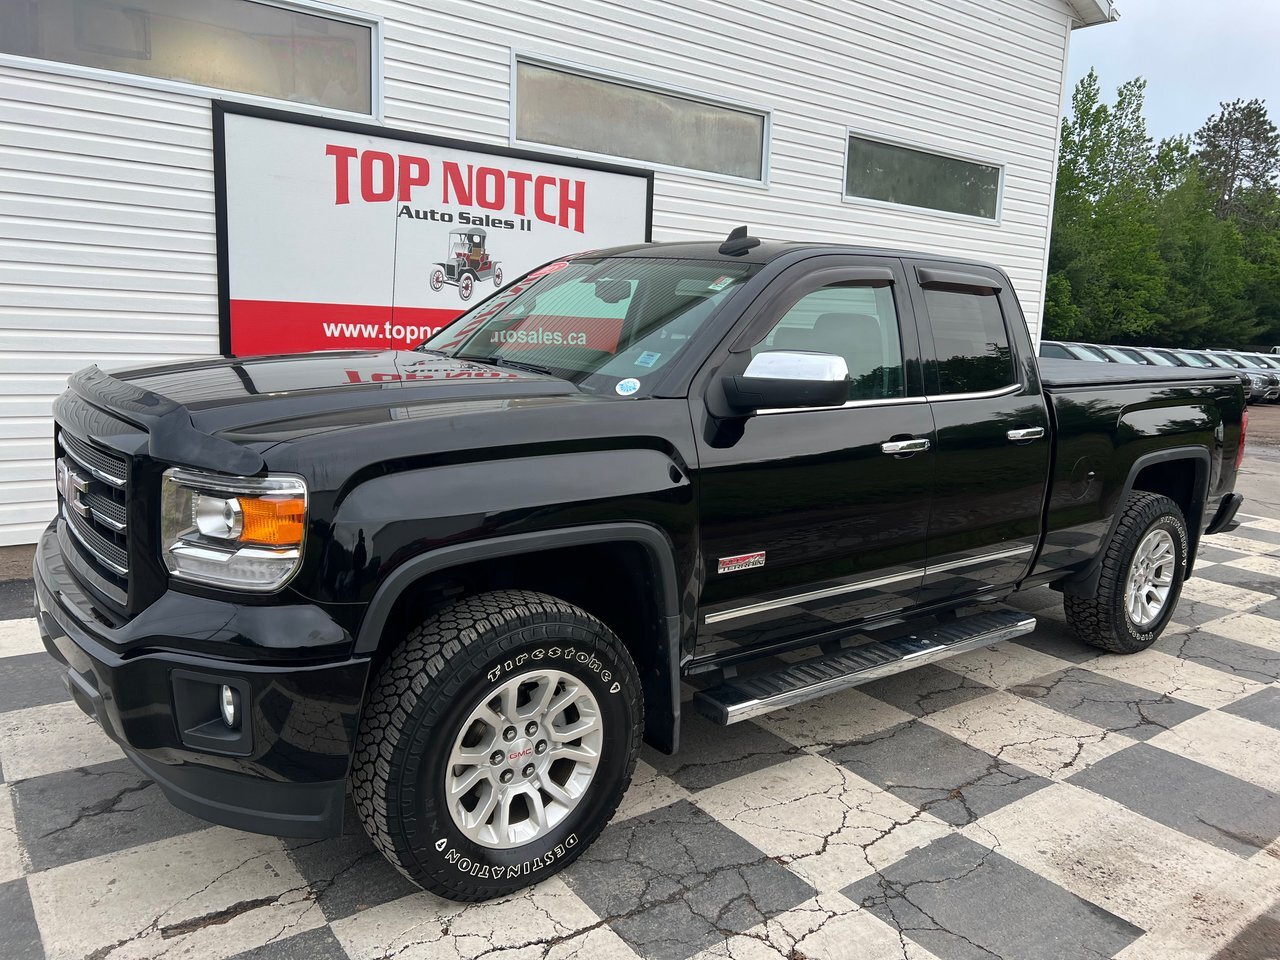 2015 GMC Sierra 1500 SLE - 4WD, Bed liner, Tow PKG, Heated seats, A.C